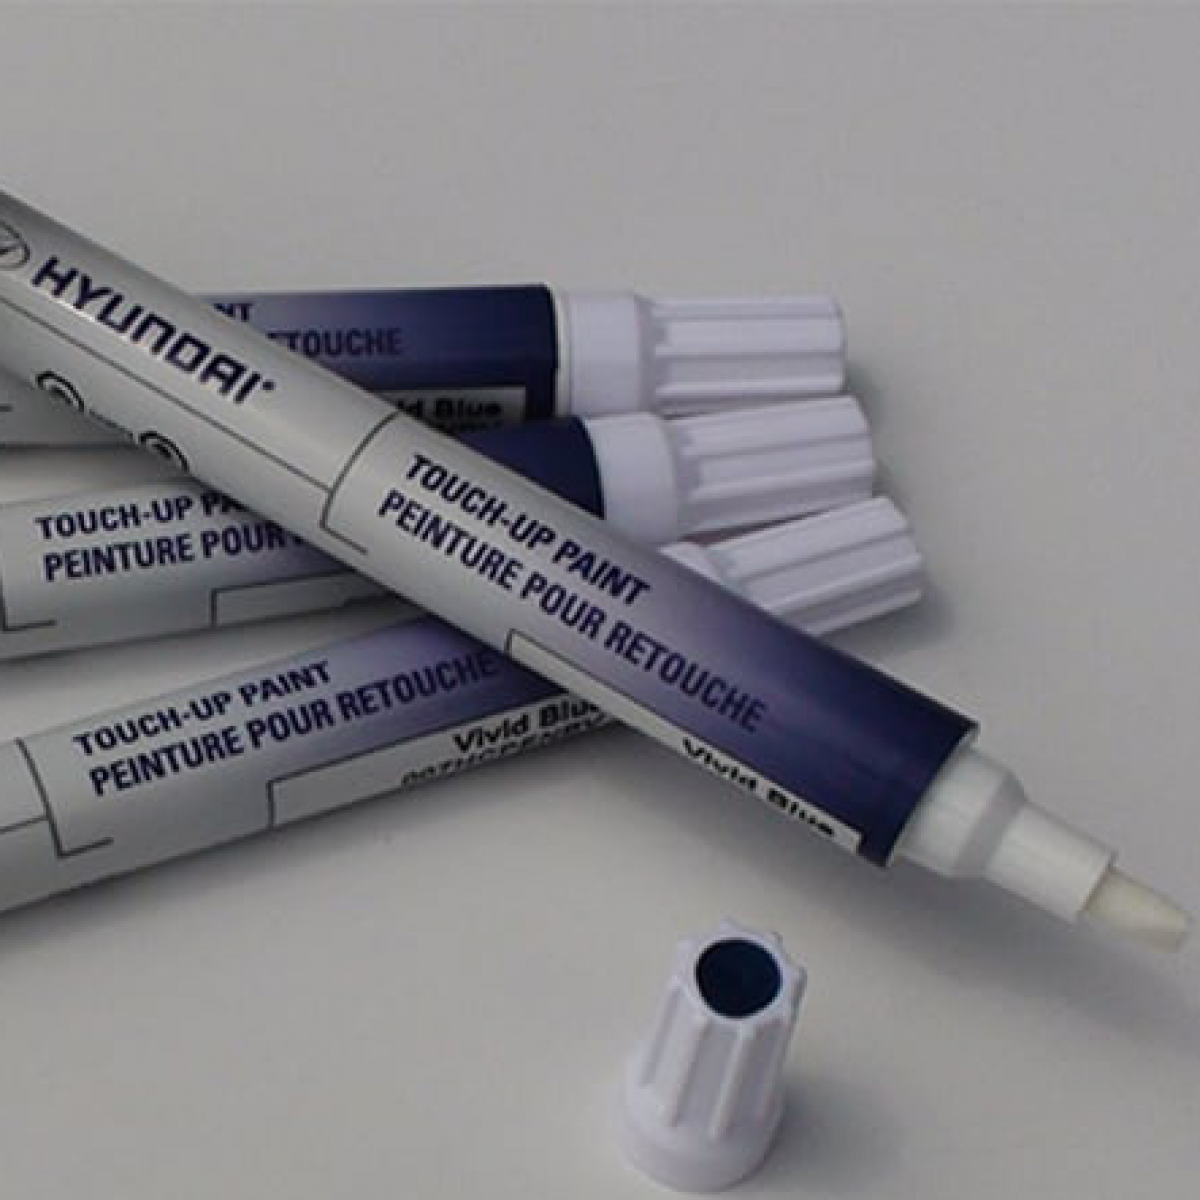 Hyundai Touch-Up Paint Pens - Atlas White 000HC-PNSAW